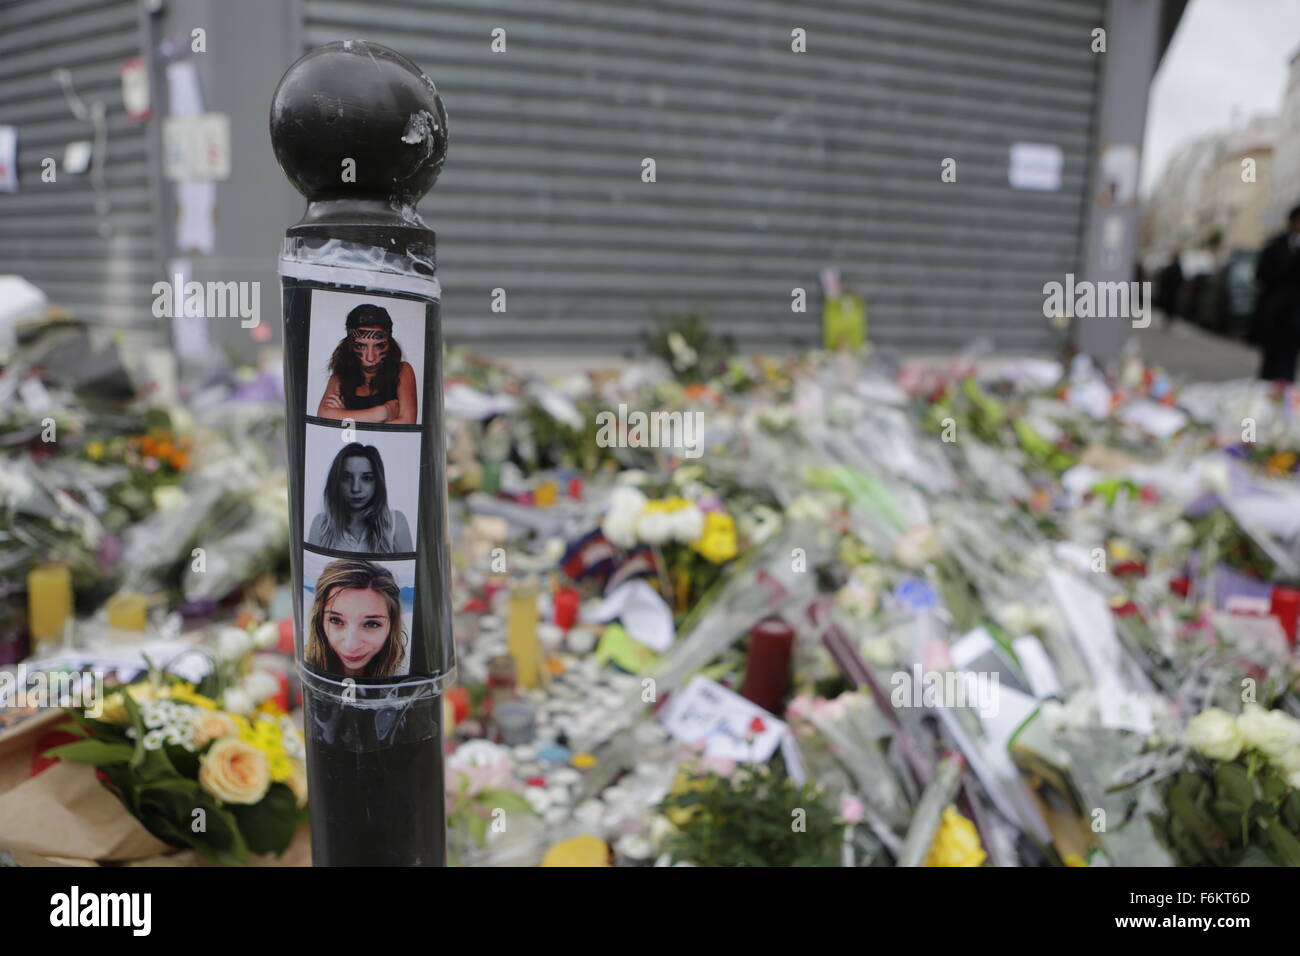 Paris, France. 17th November 2015. Pictures of some of the victims have been placed at the memorial outside the restaurant Le Petit Cambodge for the people killed here during the Paris attacks. Parisians and tourists continue to visit the memorials for the people killed in the terrorists attacks in Paris, to lay down flowers and candles and to pay their respect. Over 130 people have been by terrorist from the Islamic State. Stock Photo